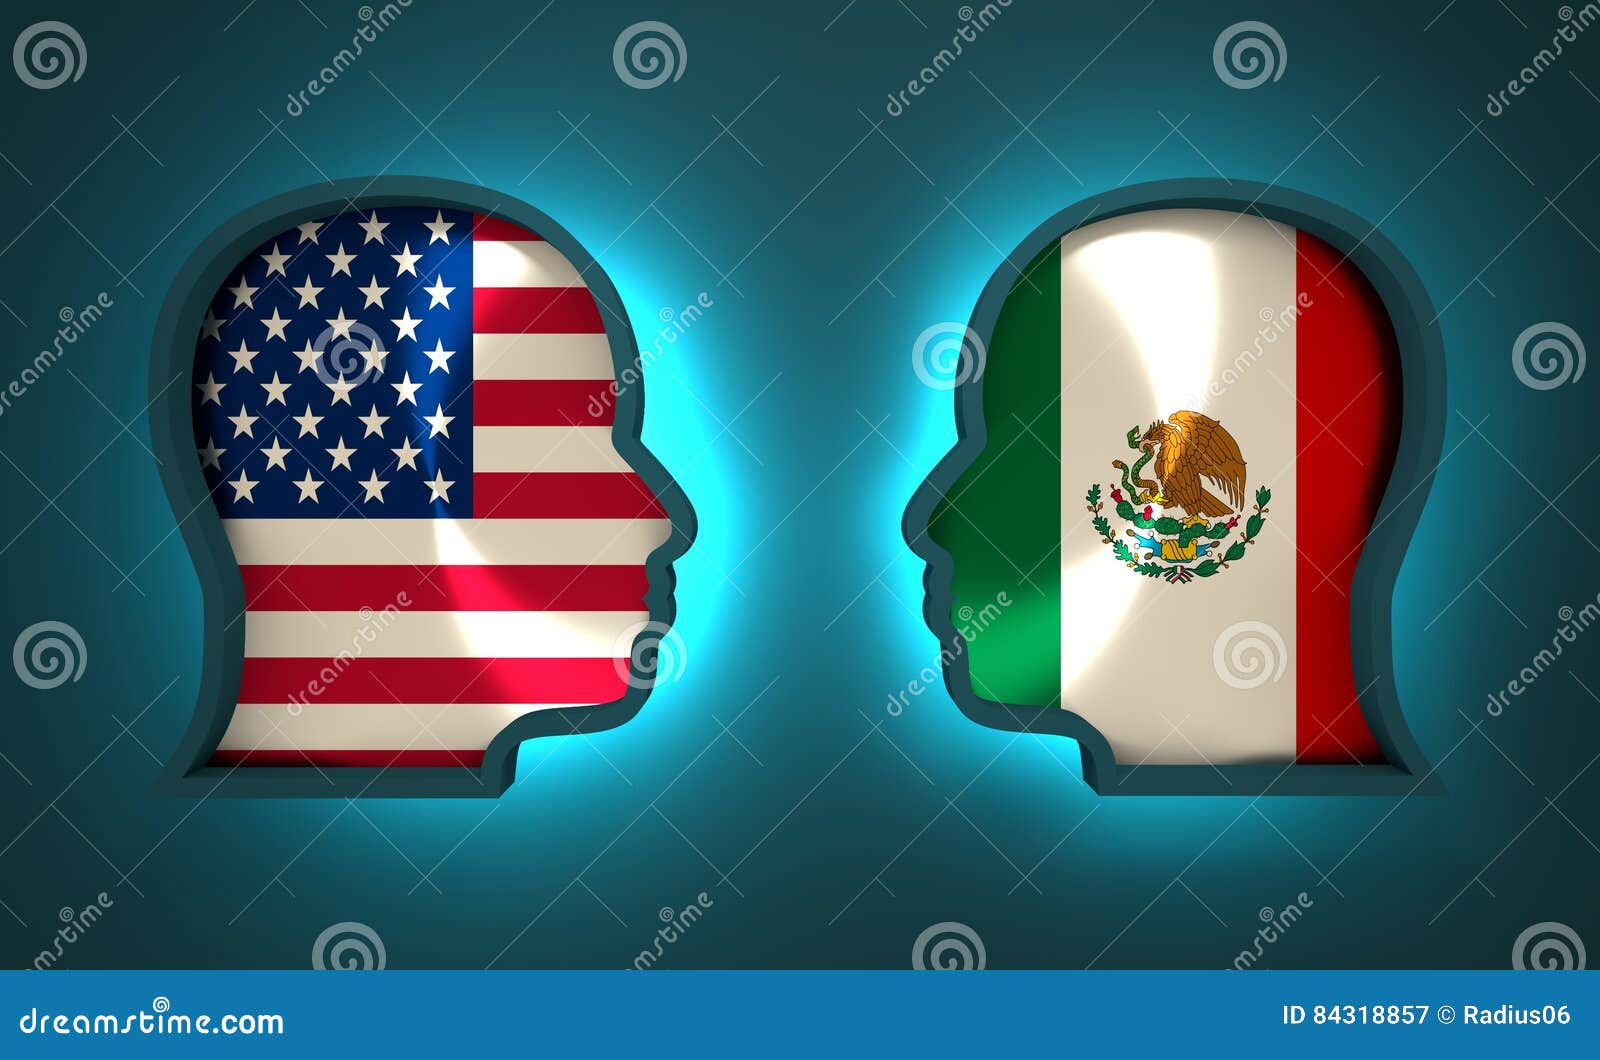 Politic And Economic Relationship Between USA And Mexico Stock